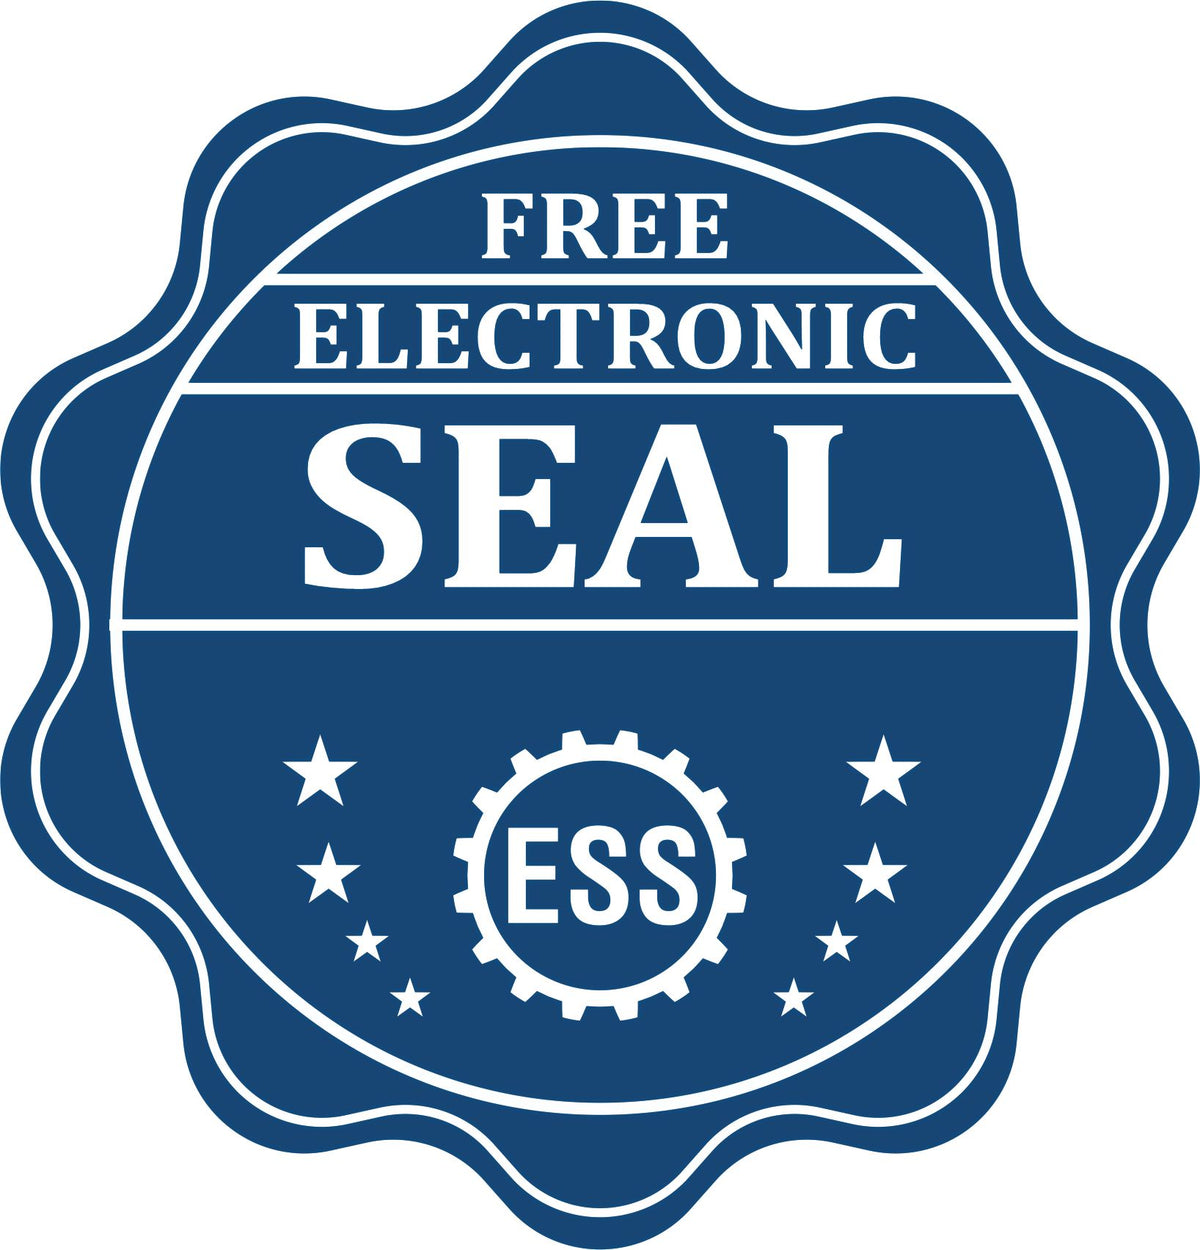 A badge showing a free electronic seal for the Idaho Desk Surveyor Seal Embosser with stars and the ESS gear on the emblem.